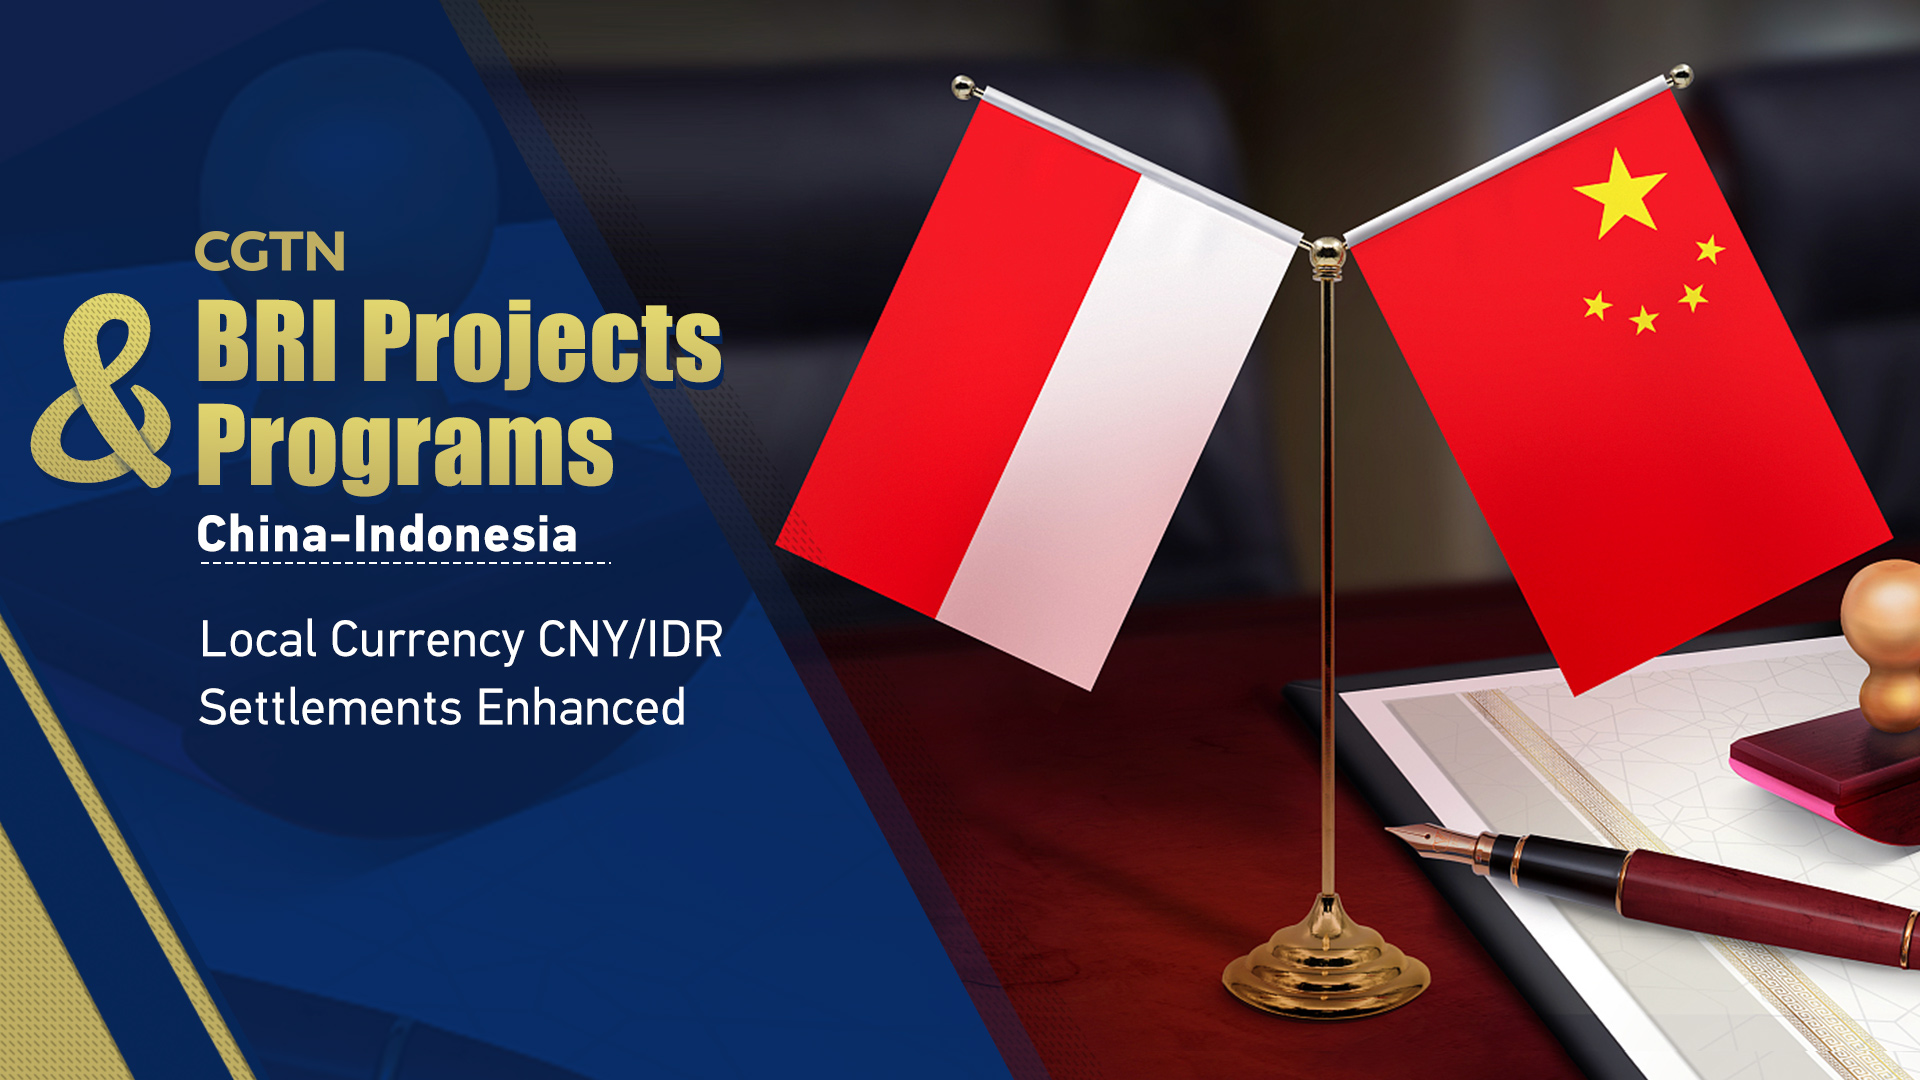 BRI Projects & Programs: China, Indonesia enhance local currency settlements